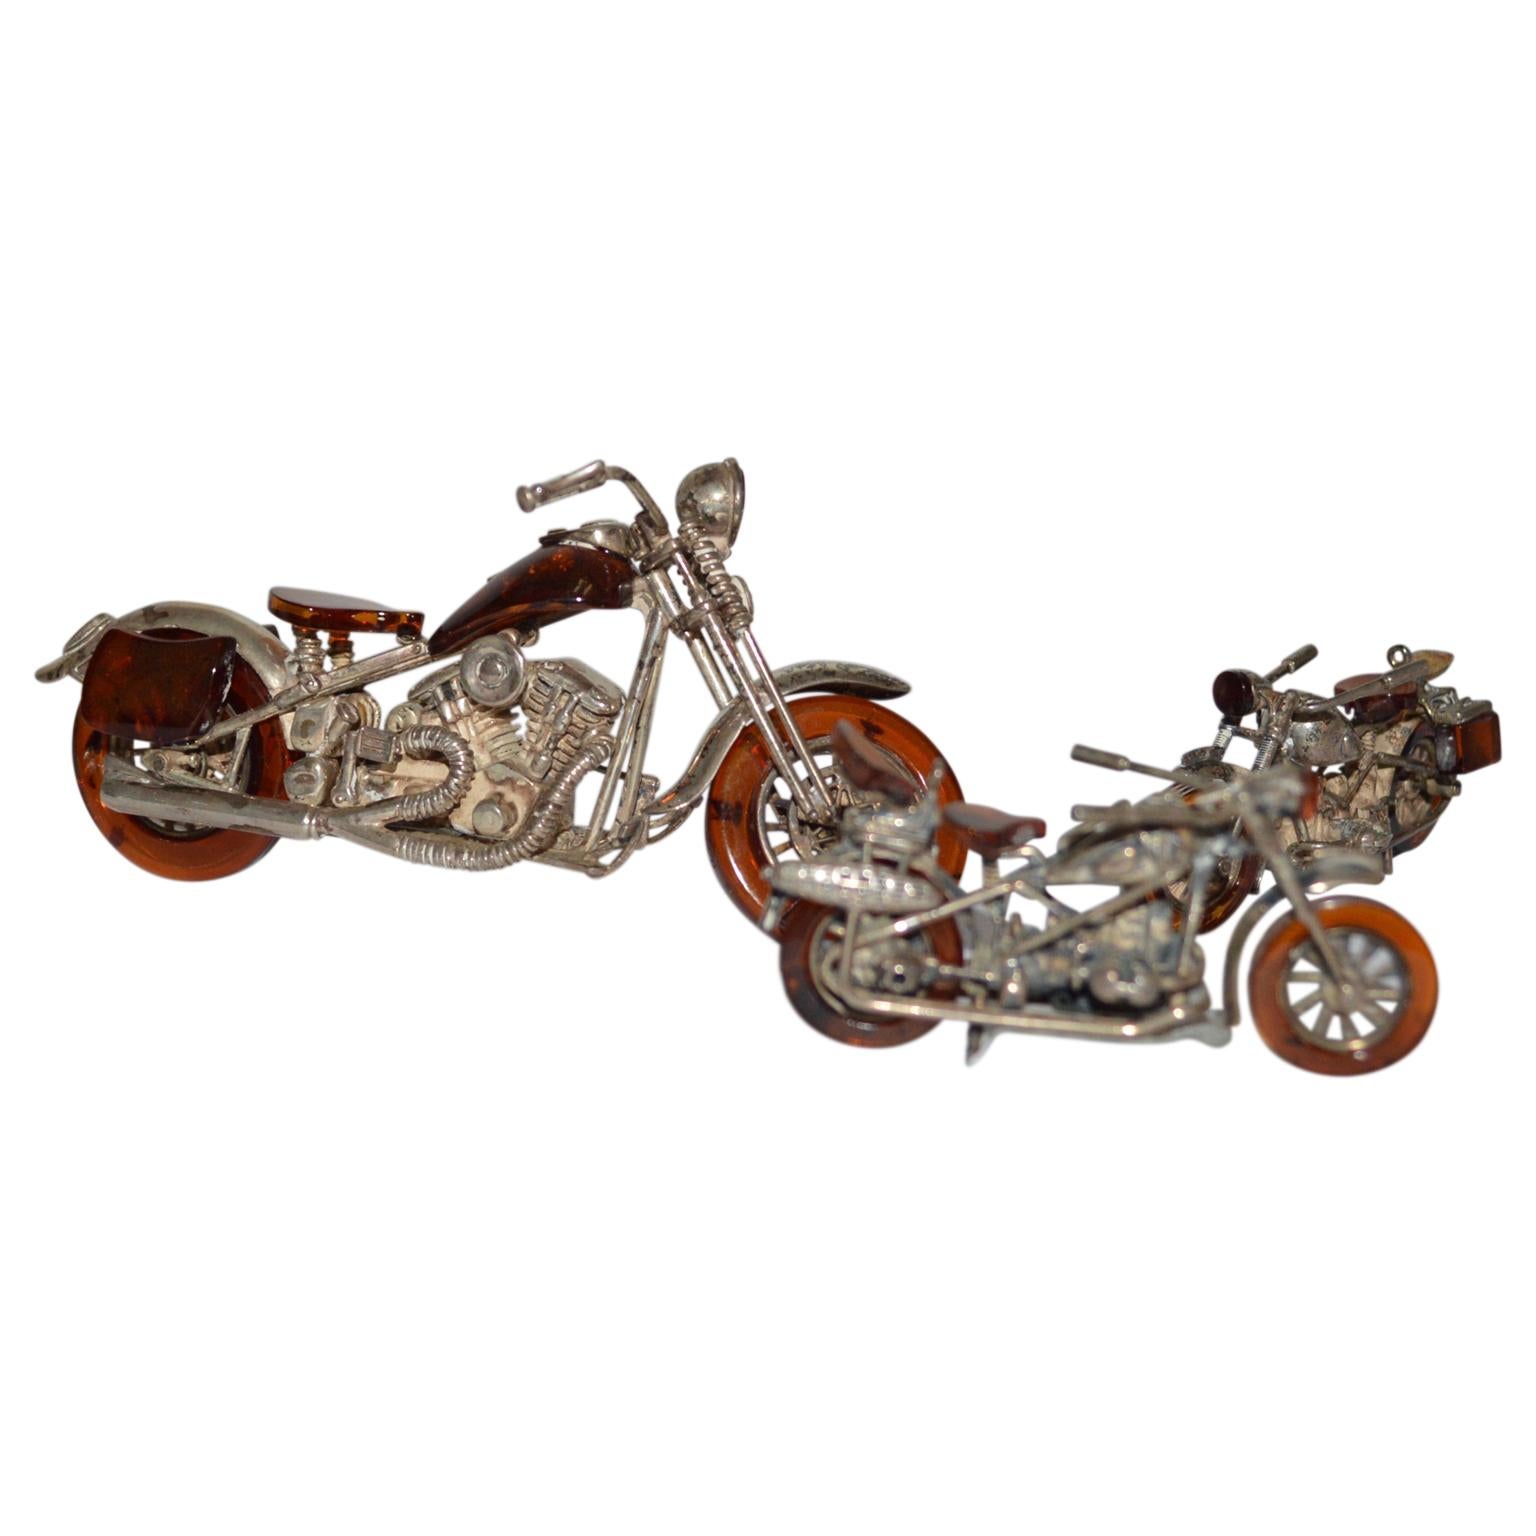 Set of 3 Miniature Amber and Silver Harley Davidson Style Motor Bikes
925 stamped silver.